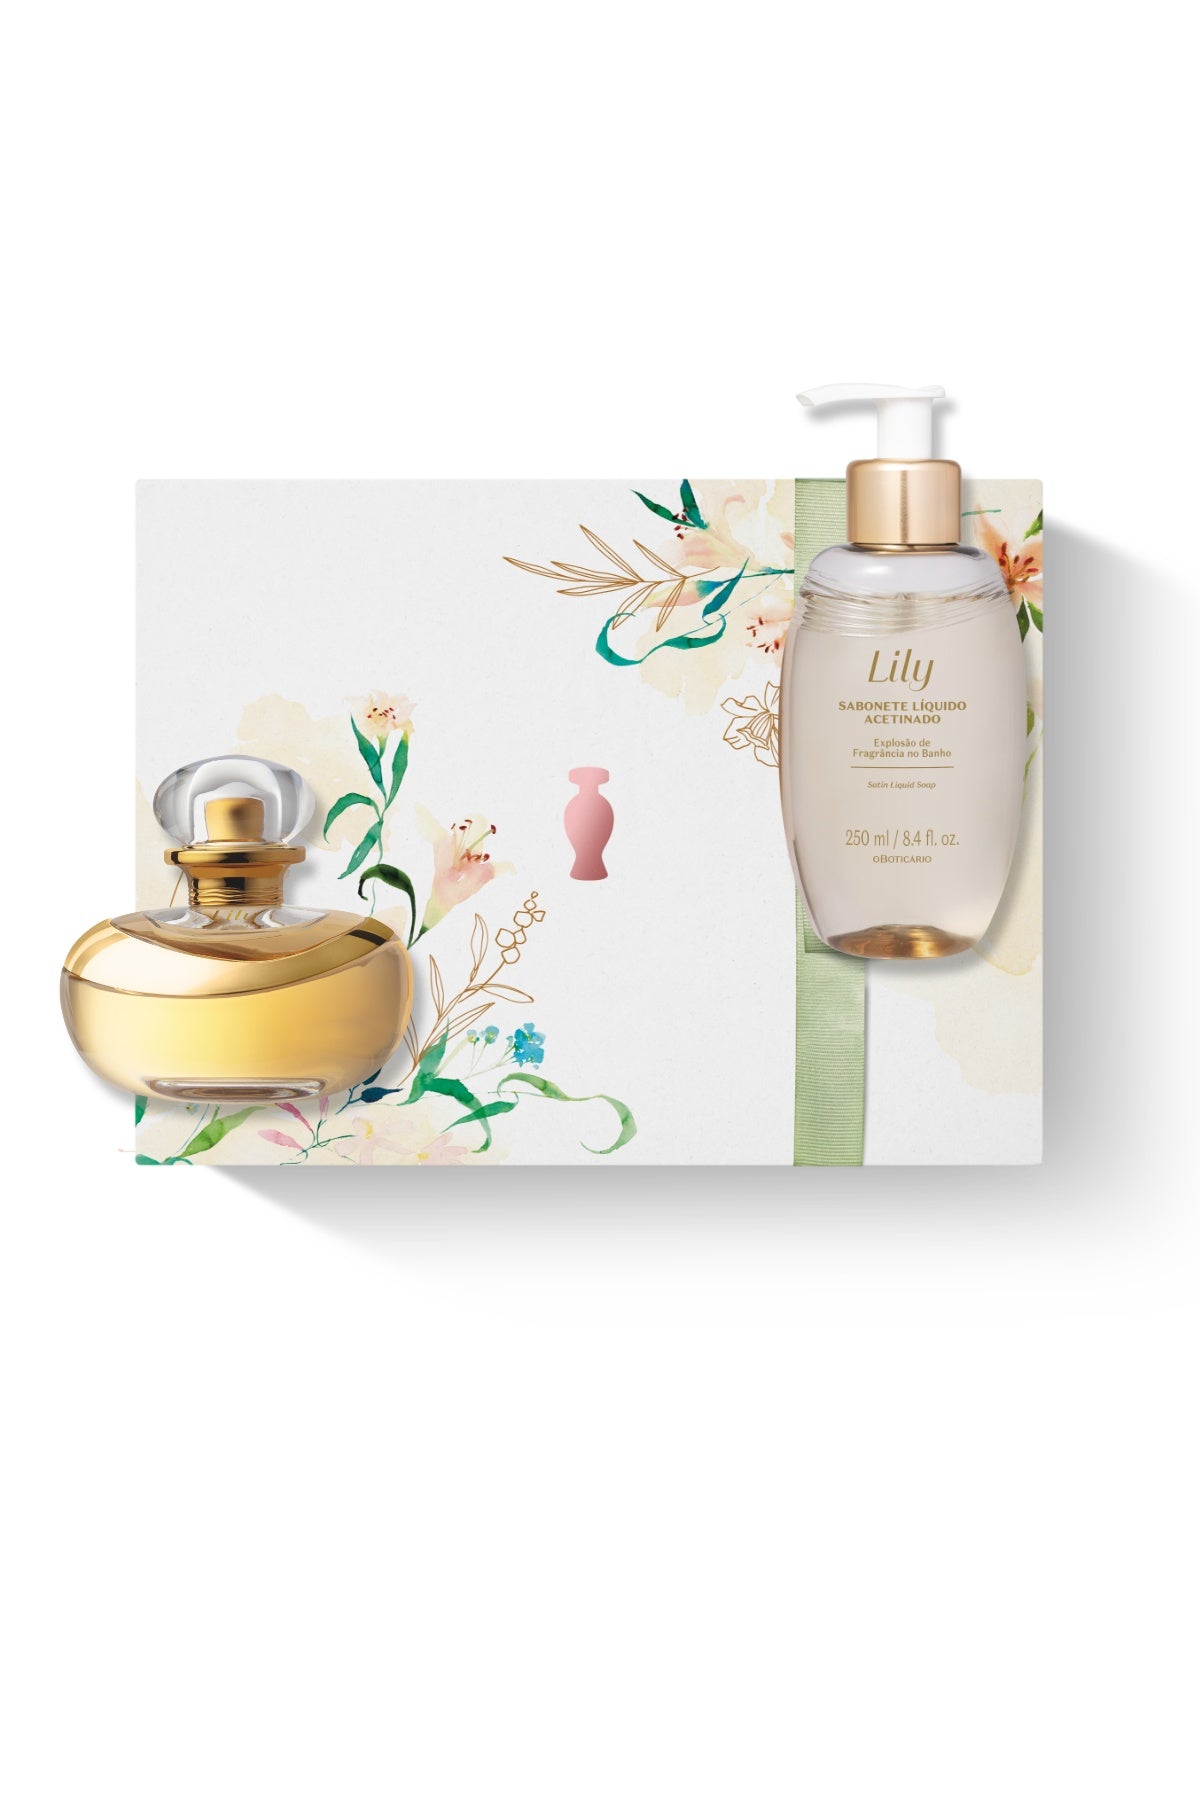 Lily Duo Bath & Fragrance Mother's Day Gift Set